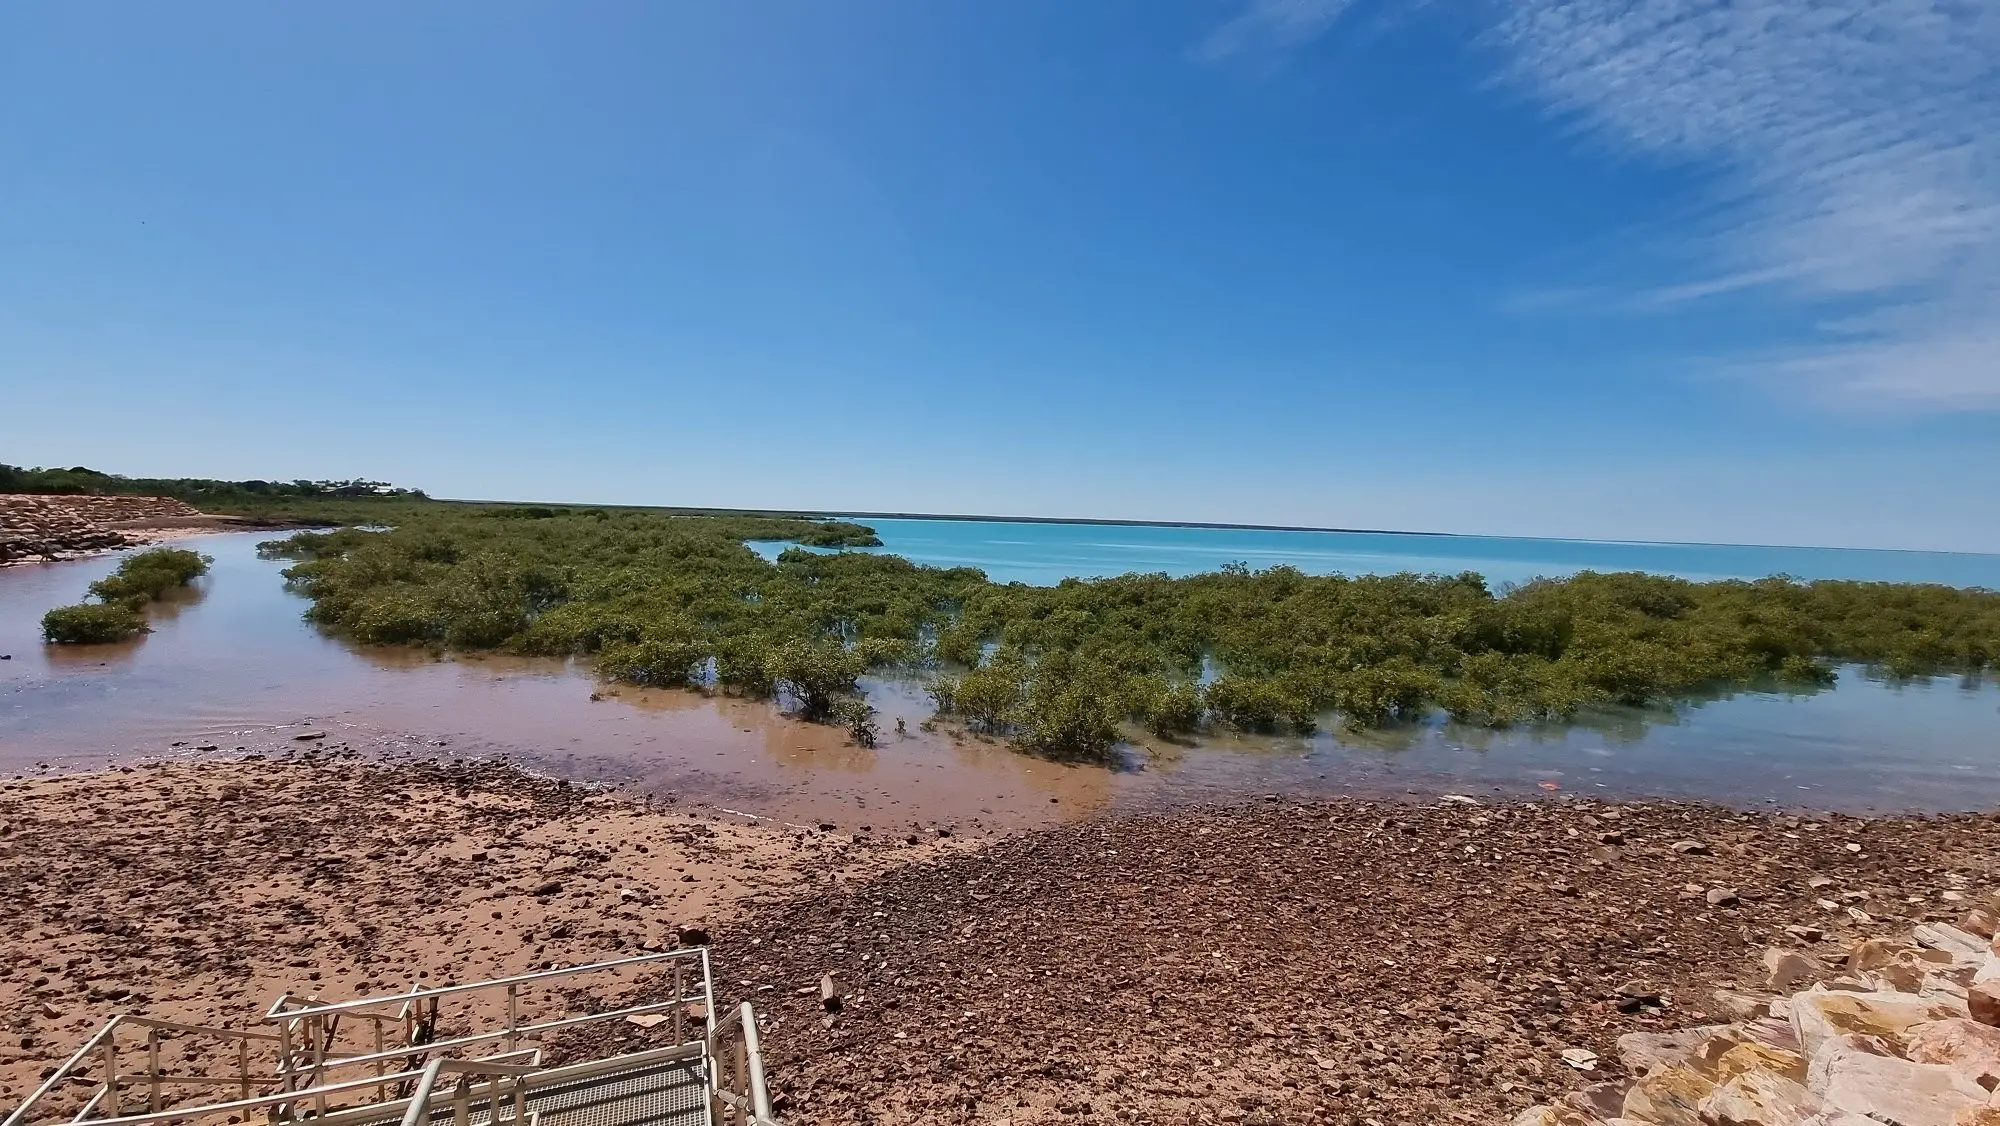 Roebuck Bay with mangroves submerged in water - Broome itinerary